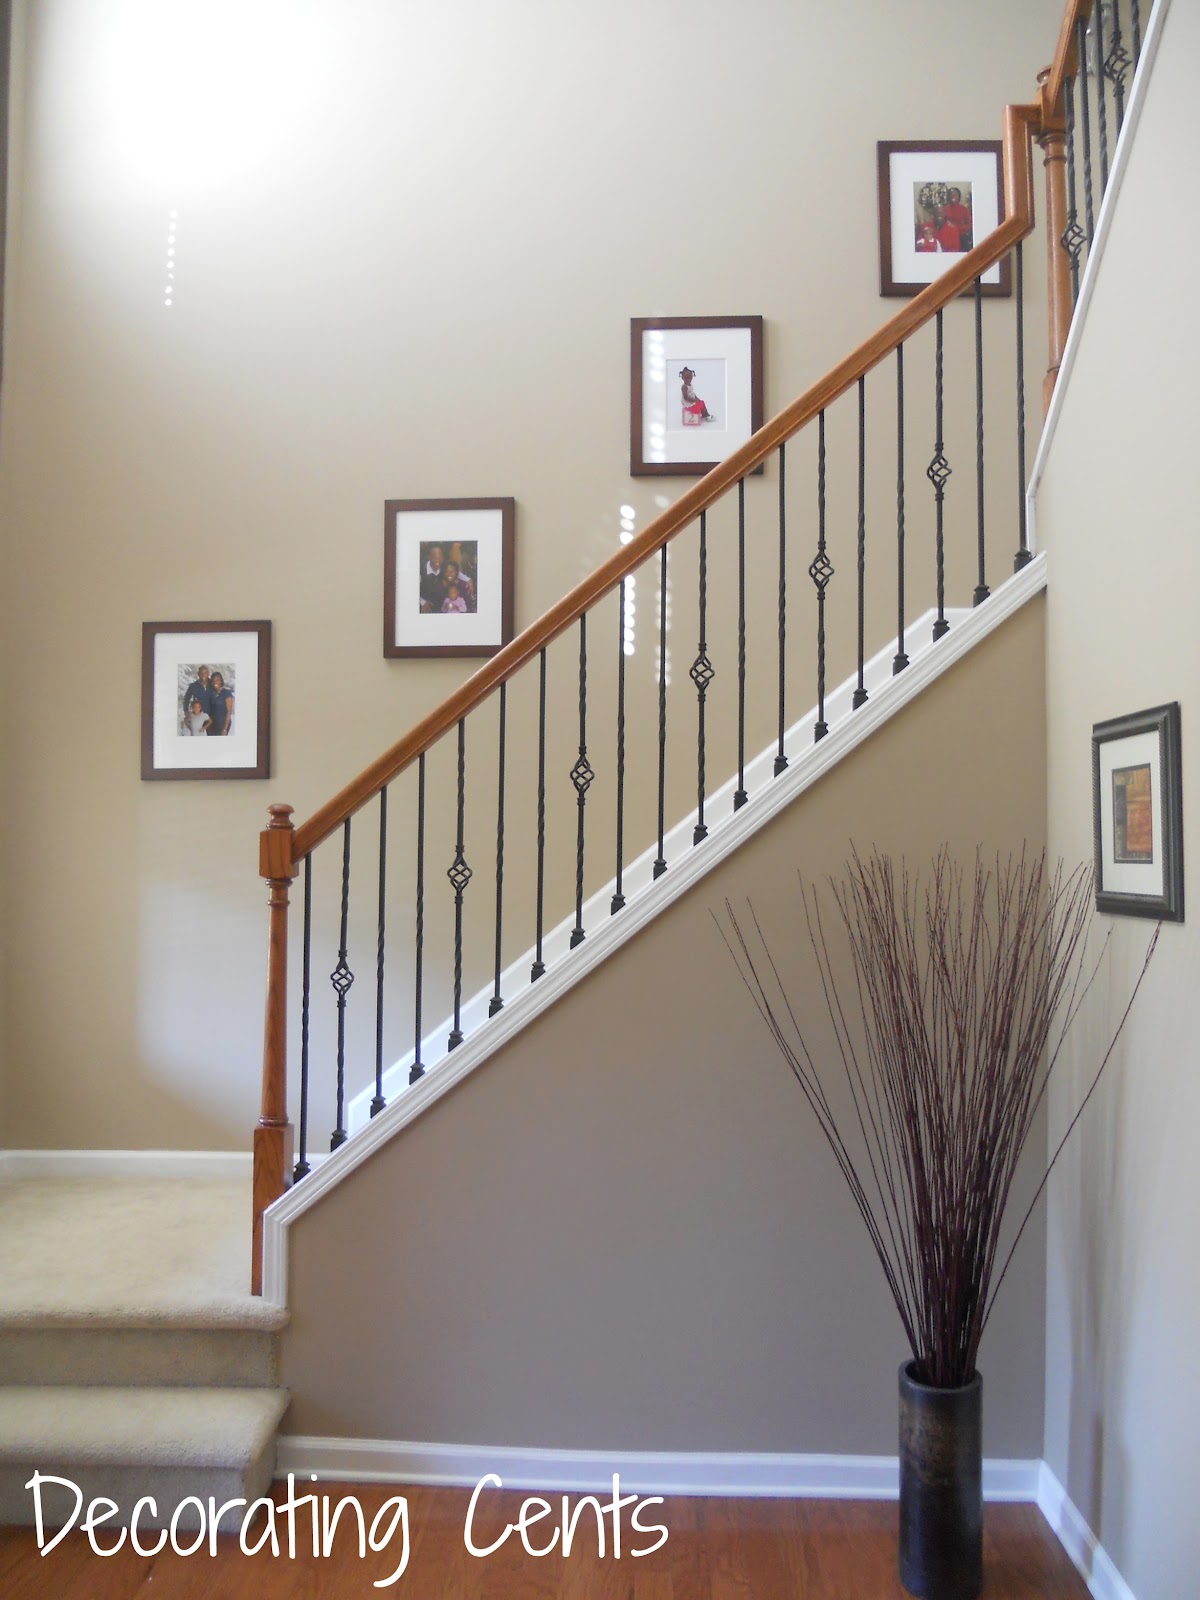 Entryway Photo Gallery Wall Decorating Cents